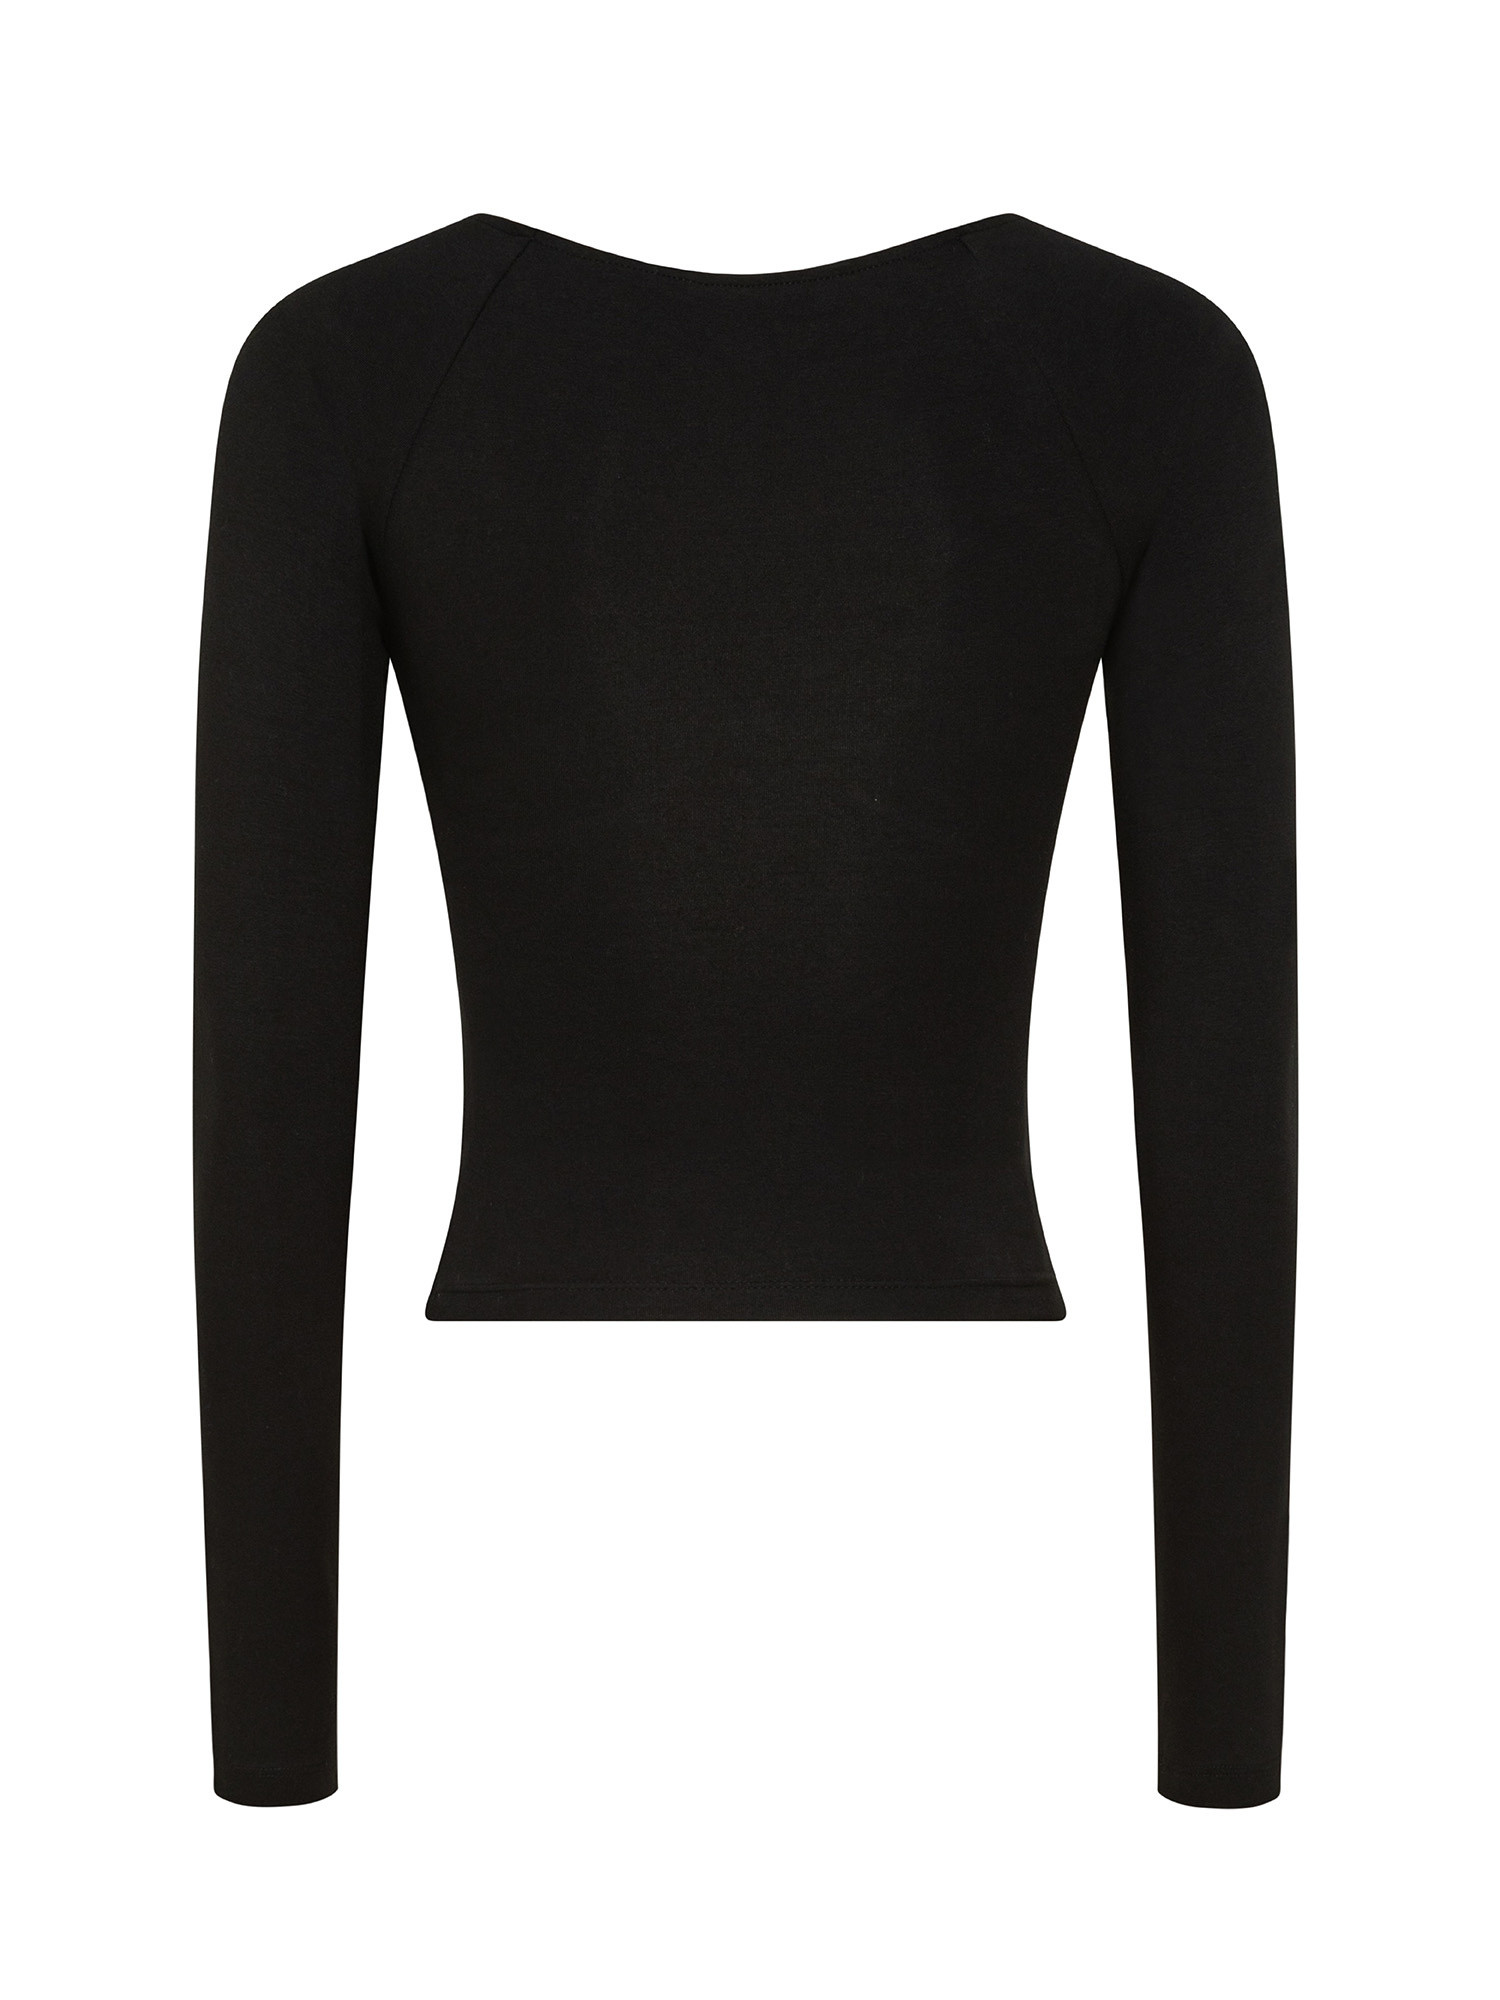 Knitted top with logo, Black, large image number 1